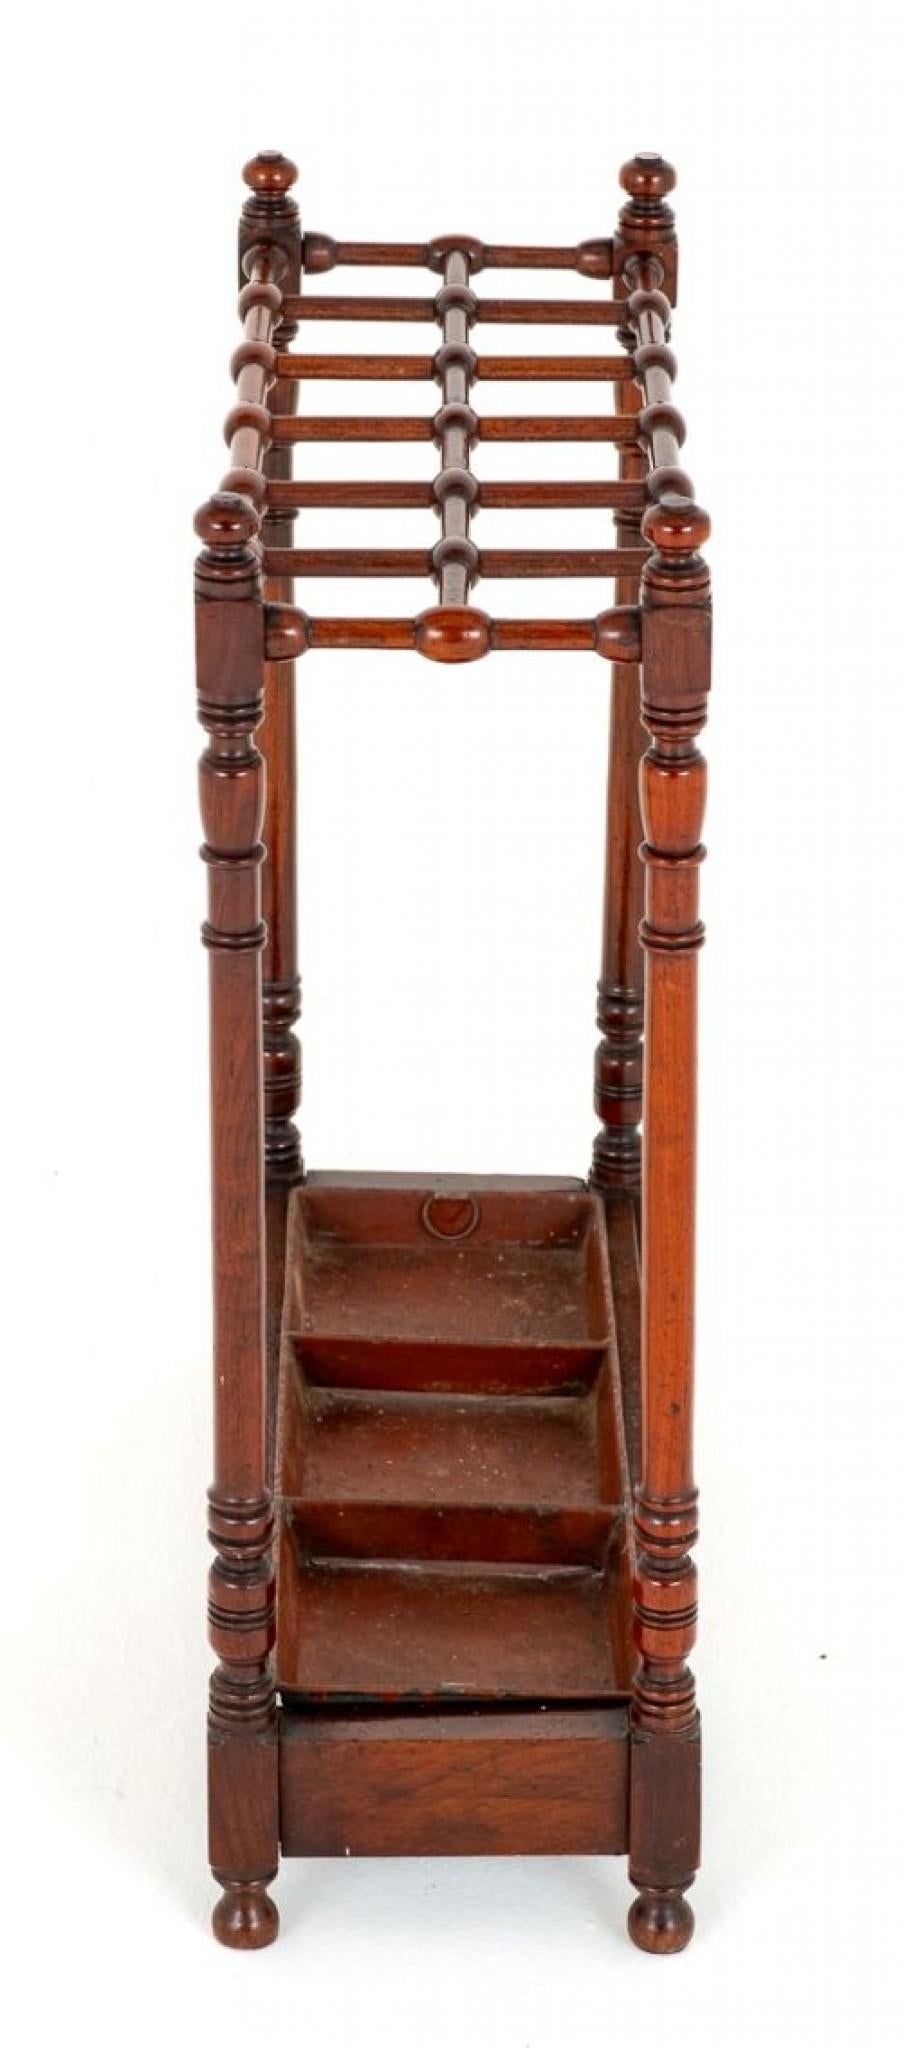 Unusual Victorian mahogany Stick Stand.
Circa 1860
This Stick Stand Features Turned Supports and an Unusual Turned and Sectioned Top for Retaining Ones Sticks, Umbrellas Etc.
Comes Complete with Metal Drip Tray.
Presented in Good Condition